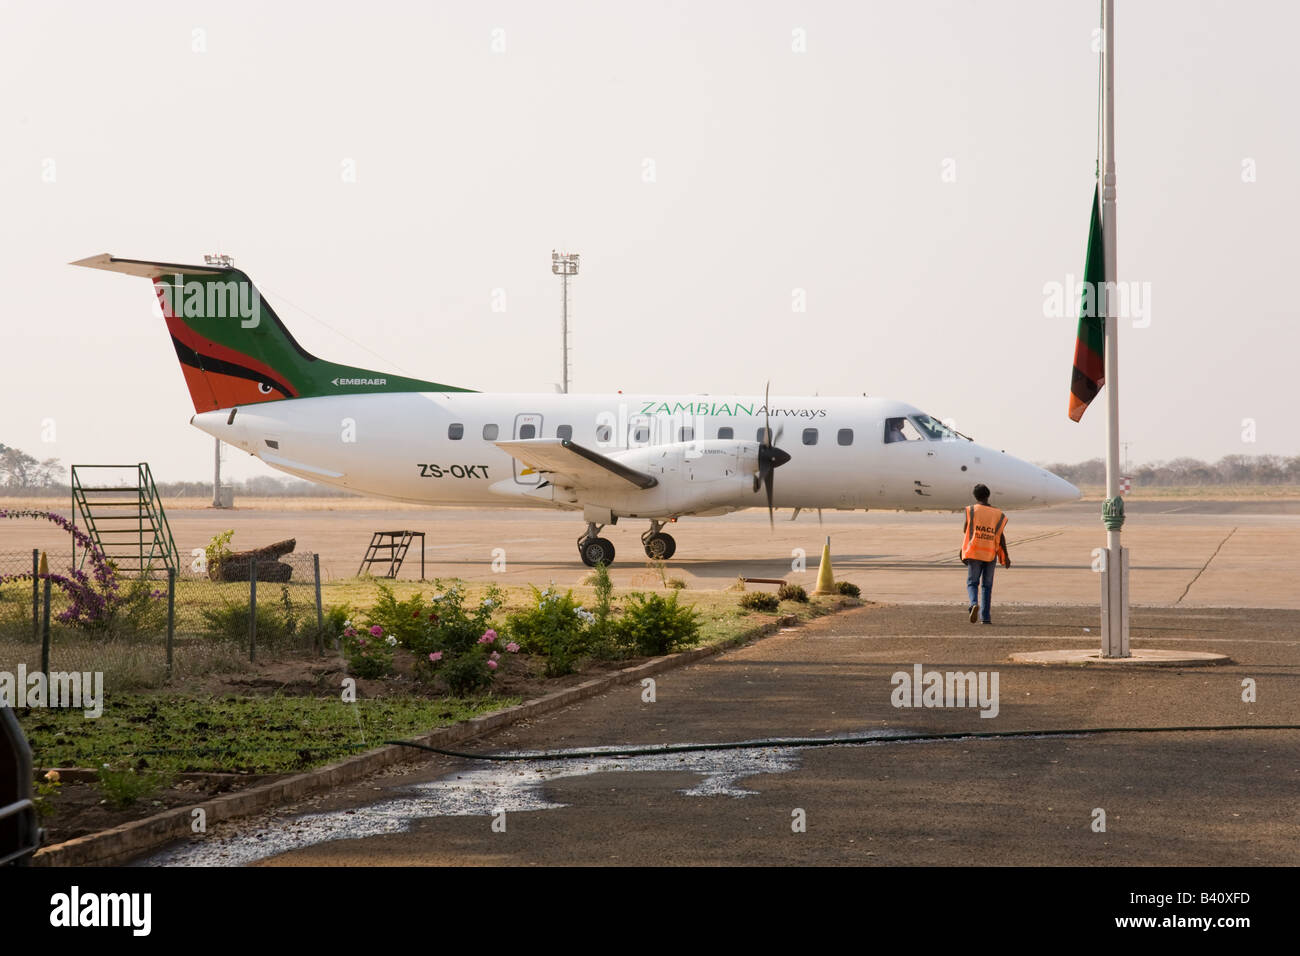 Zambian airways plane on the runway at Livingstone airport flying to Lusaka Zambia Africa Stock Photo